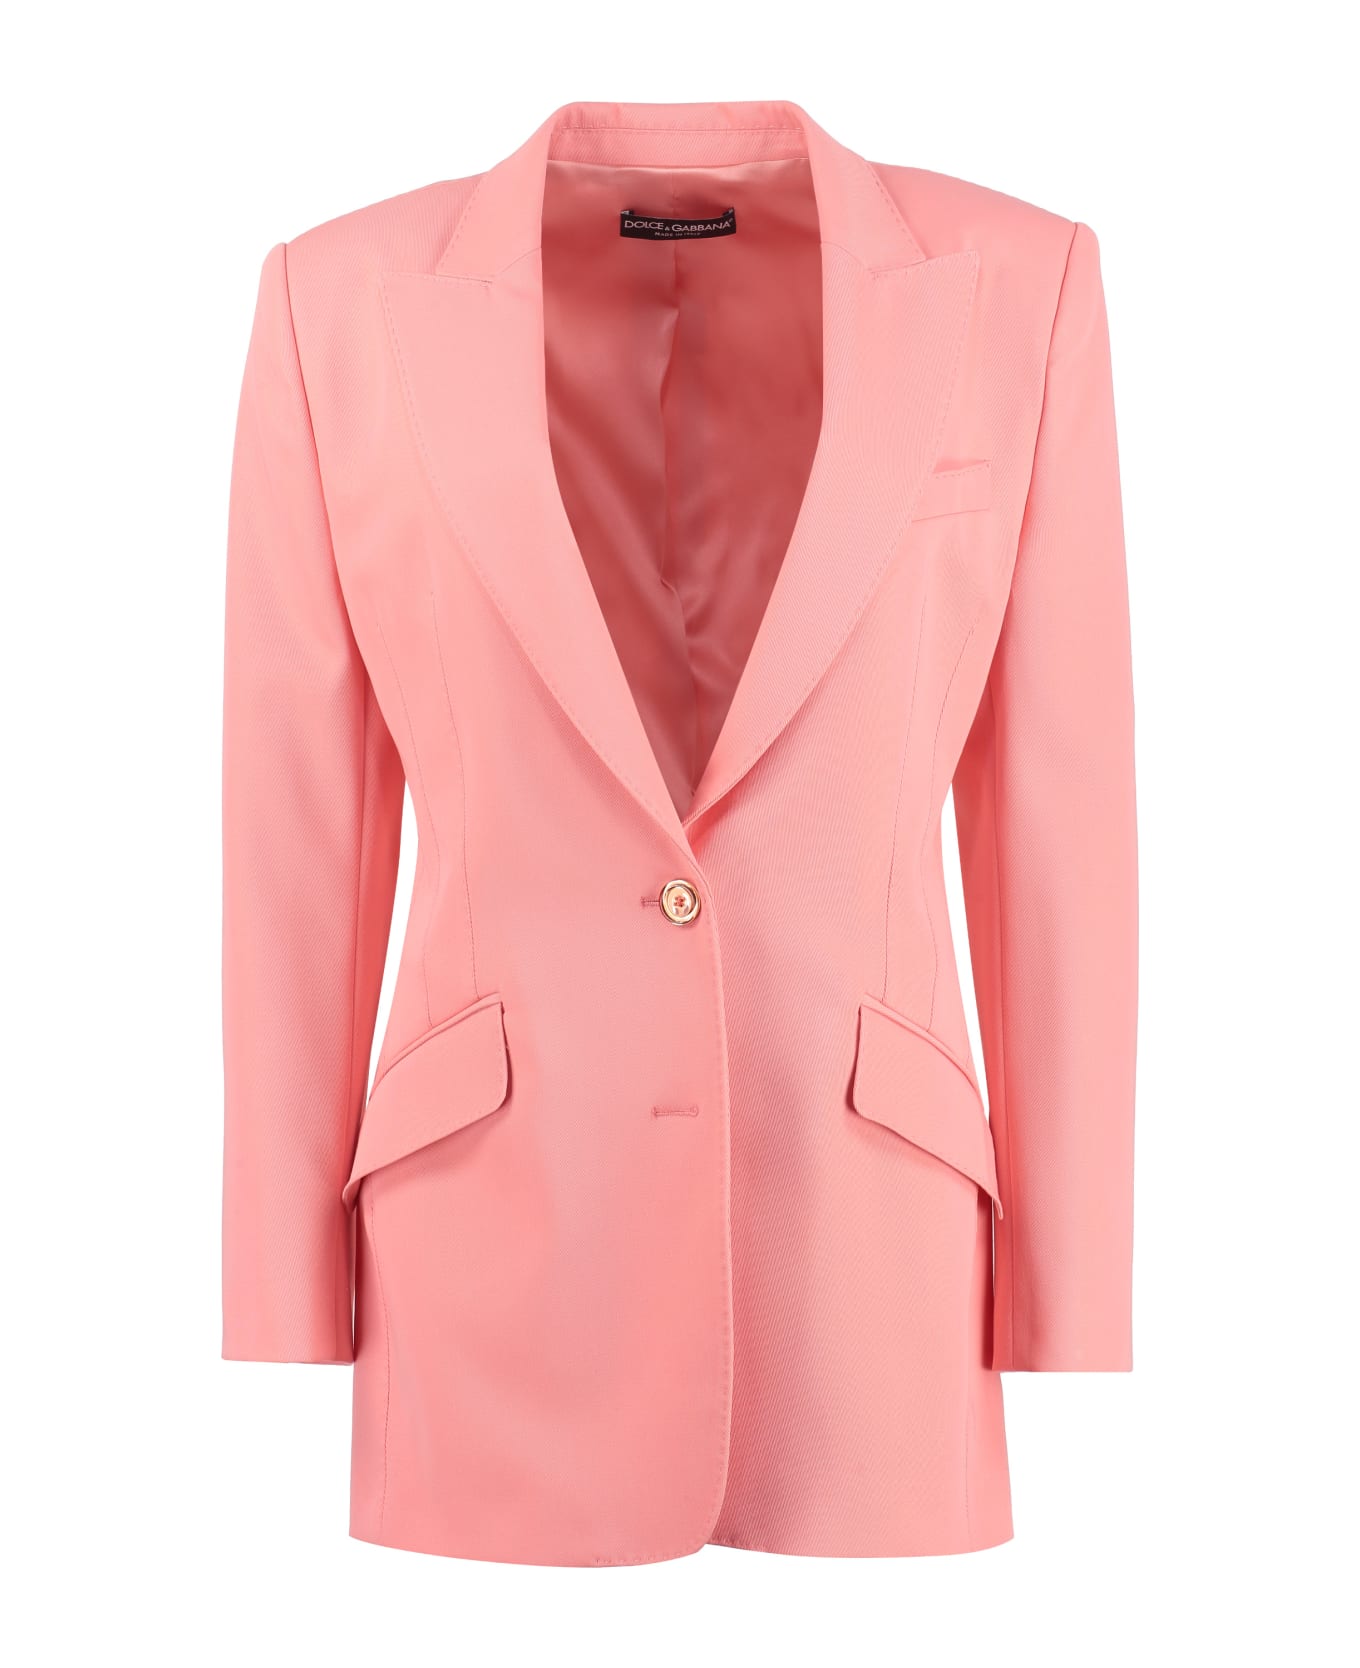 Dolce & Gabbana Single-breasted Two-button Jacket - Salmon pink